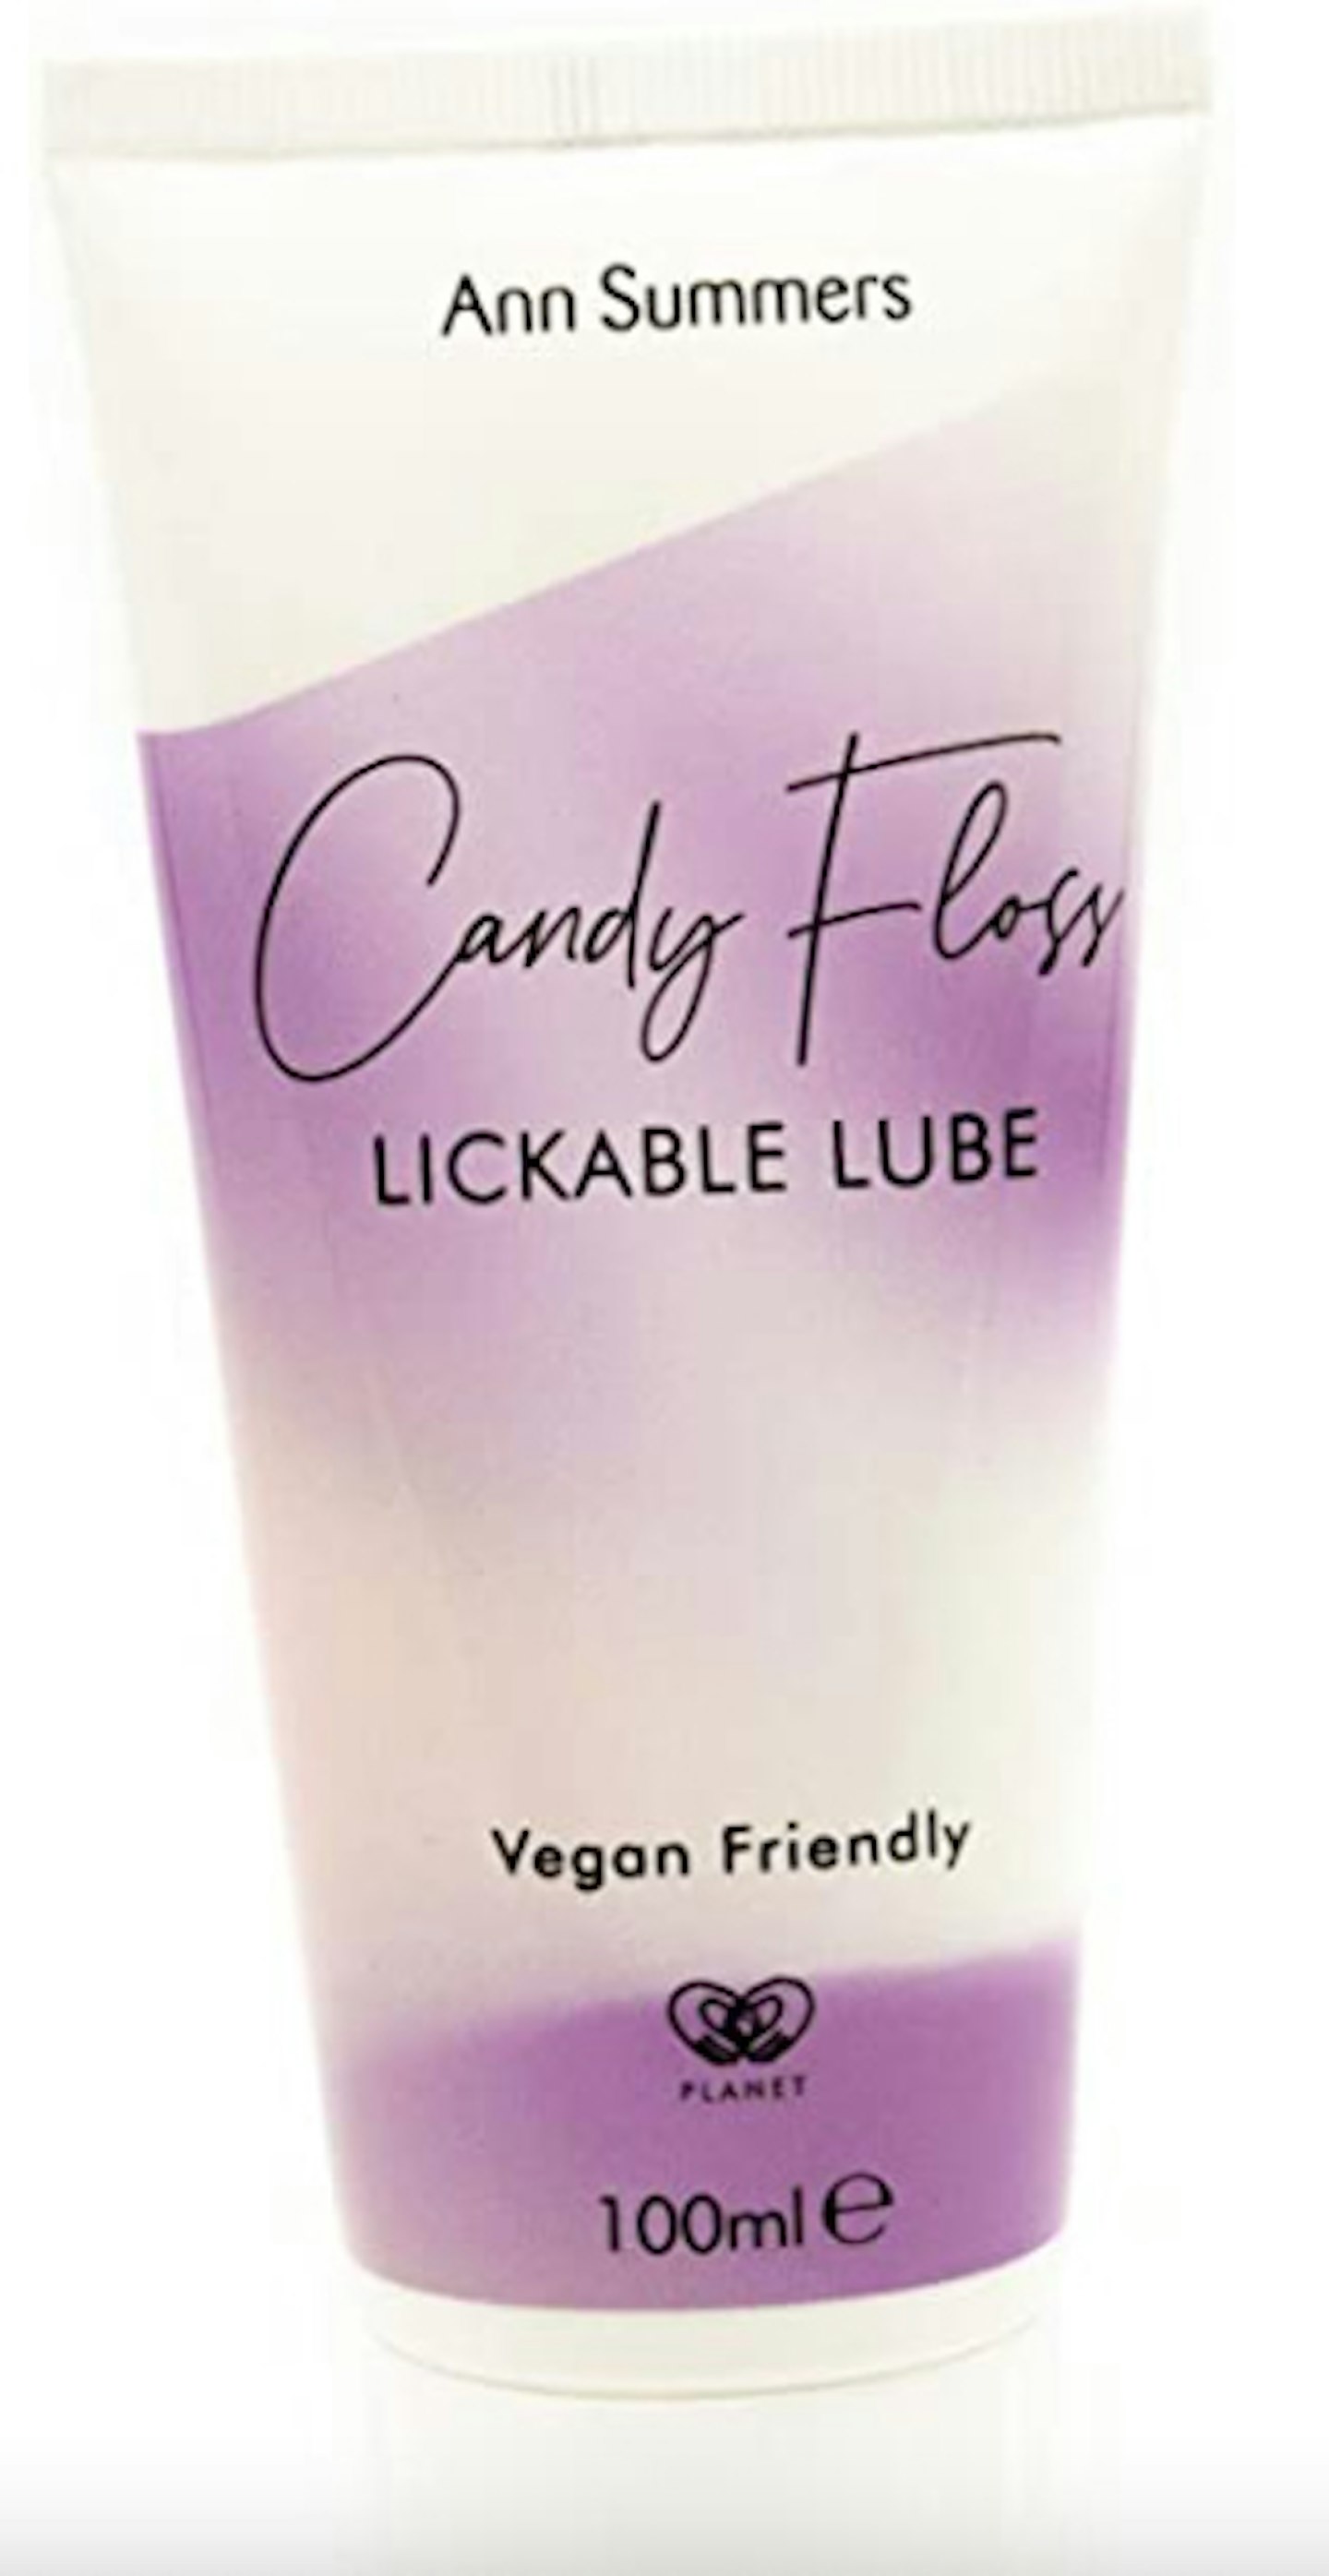 Ann Summers Candy Floss Lickable Lube